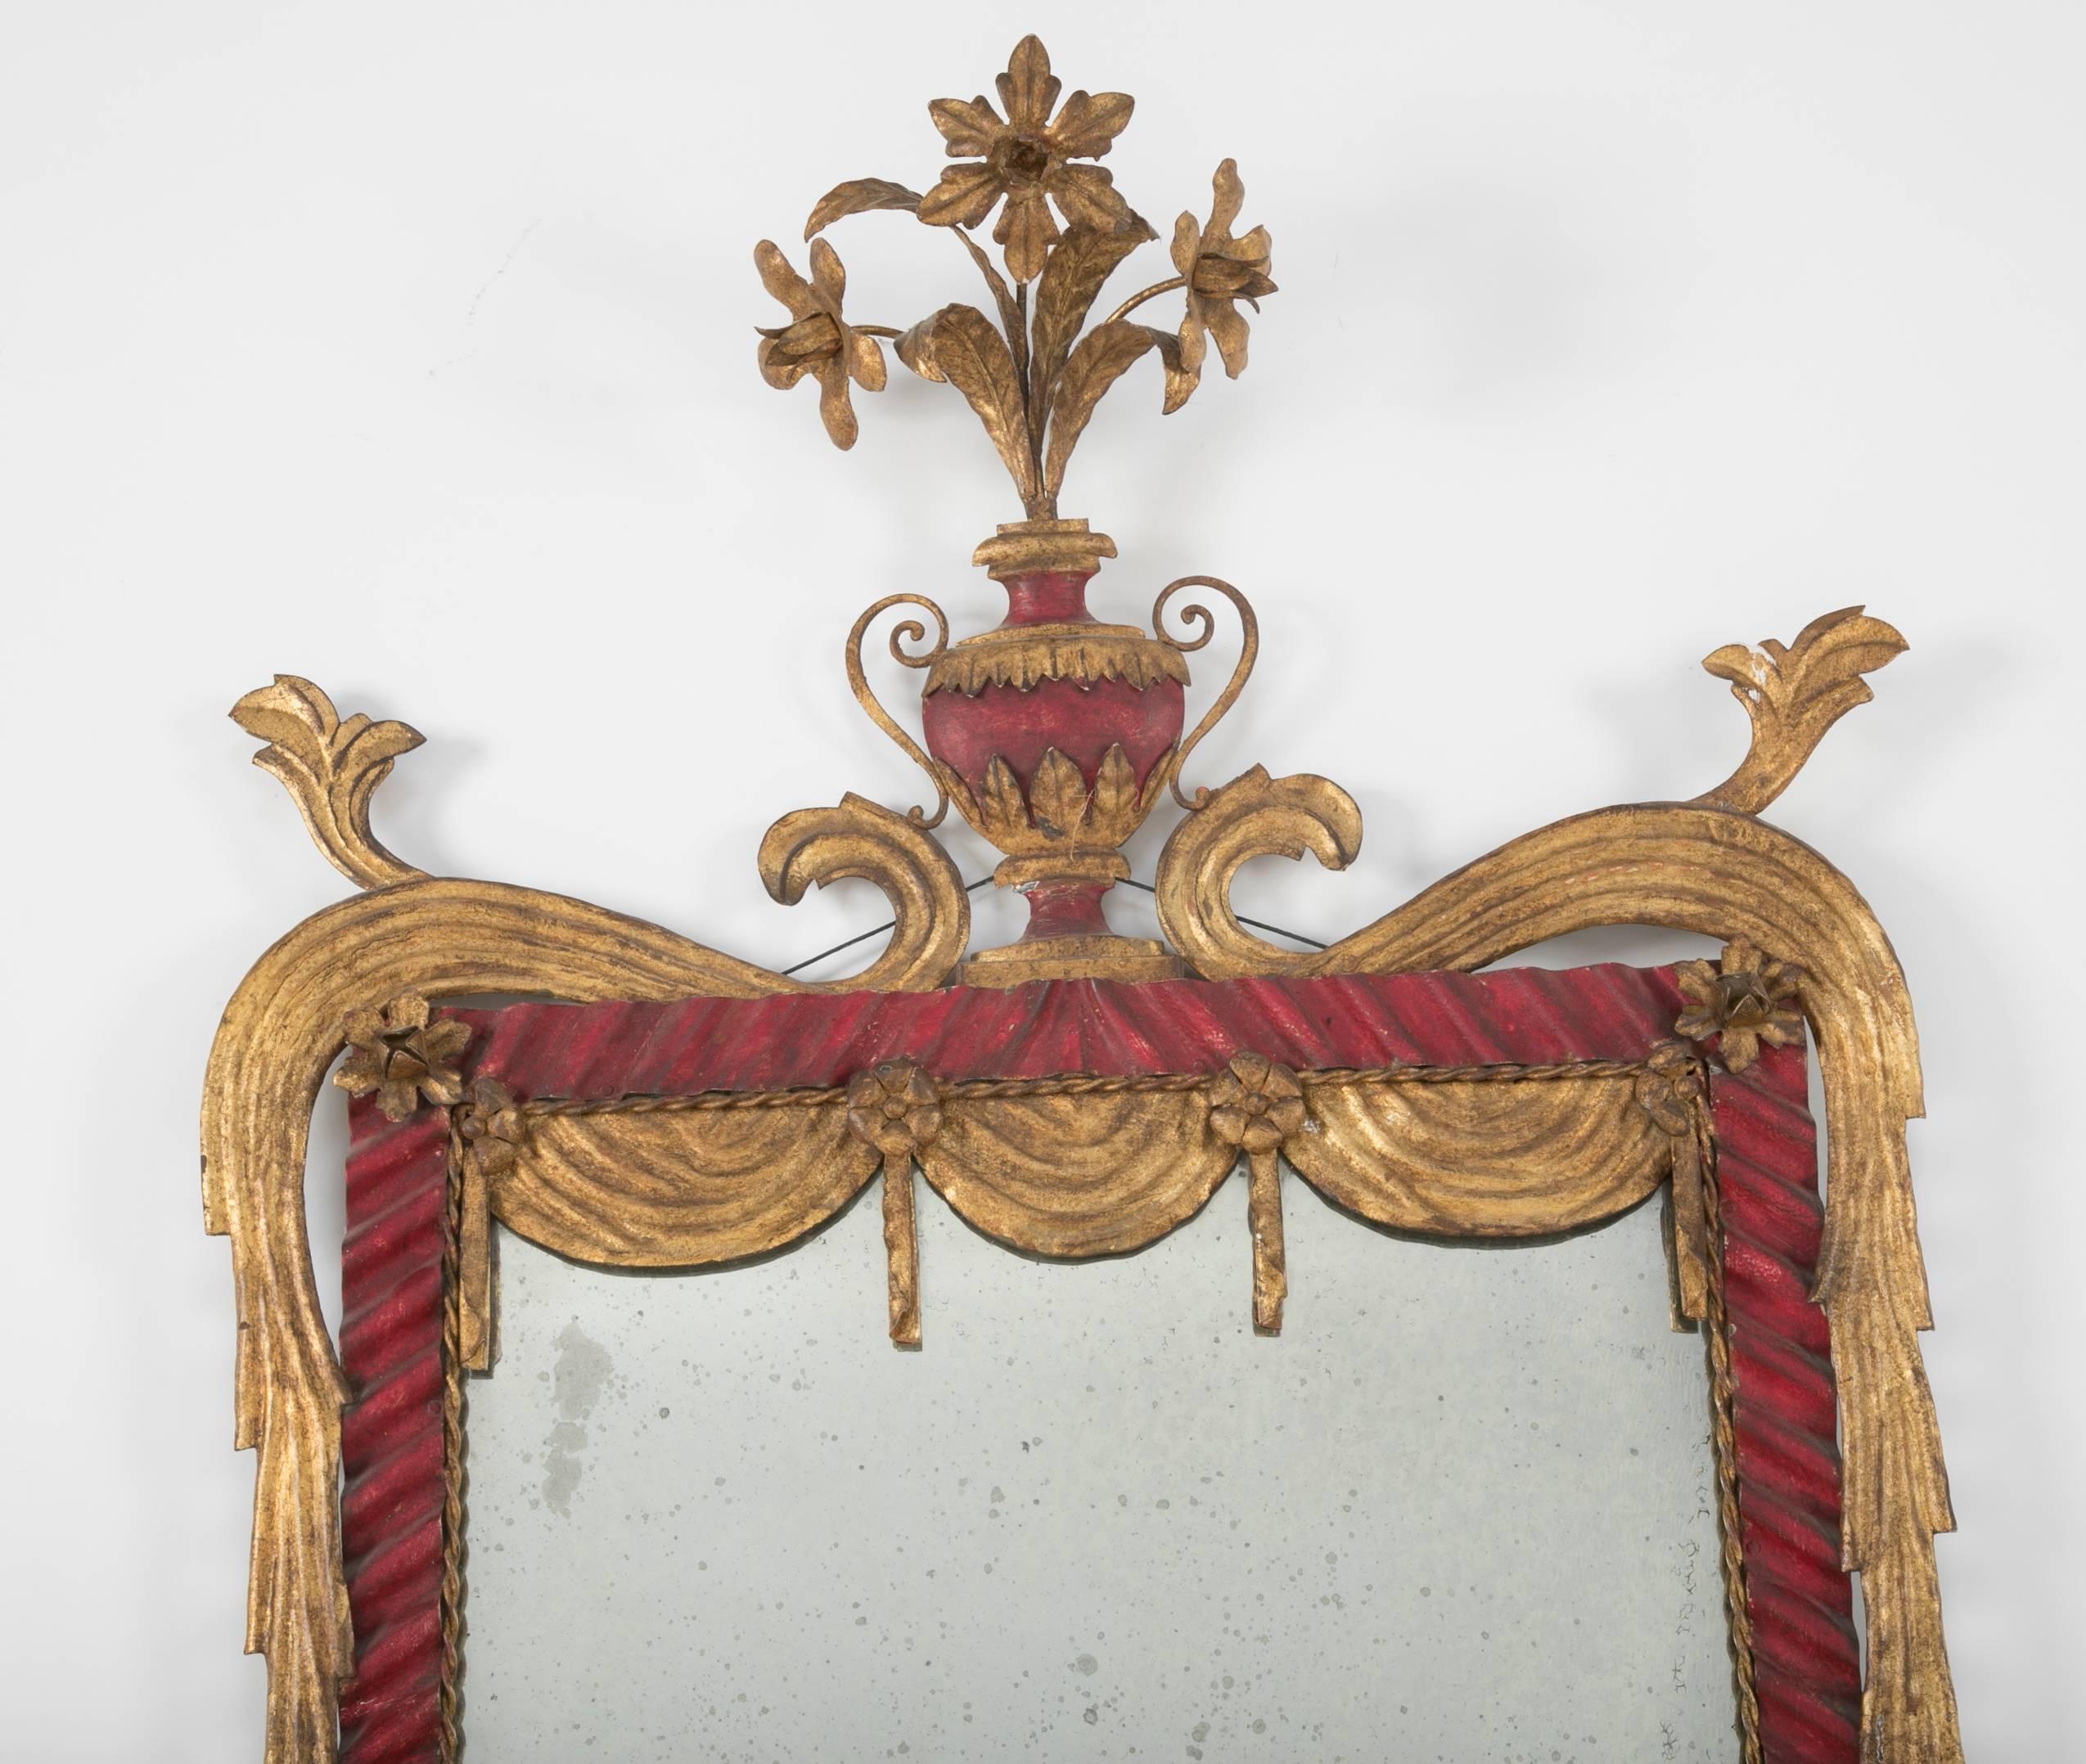 Italian Rococo style painted tole mirror, the 'Venetian Red' ribbon frame with gilt faux drapery swags topped by an urn vase of gilt metal flowers. The color and style of this mirror are very much in the Hollywood Regency style of Dorothy Draper.
